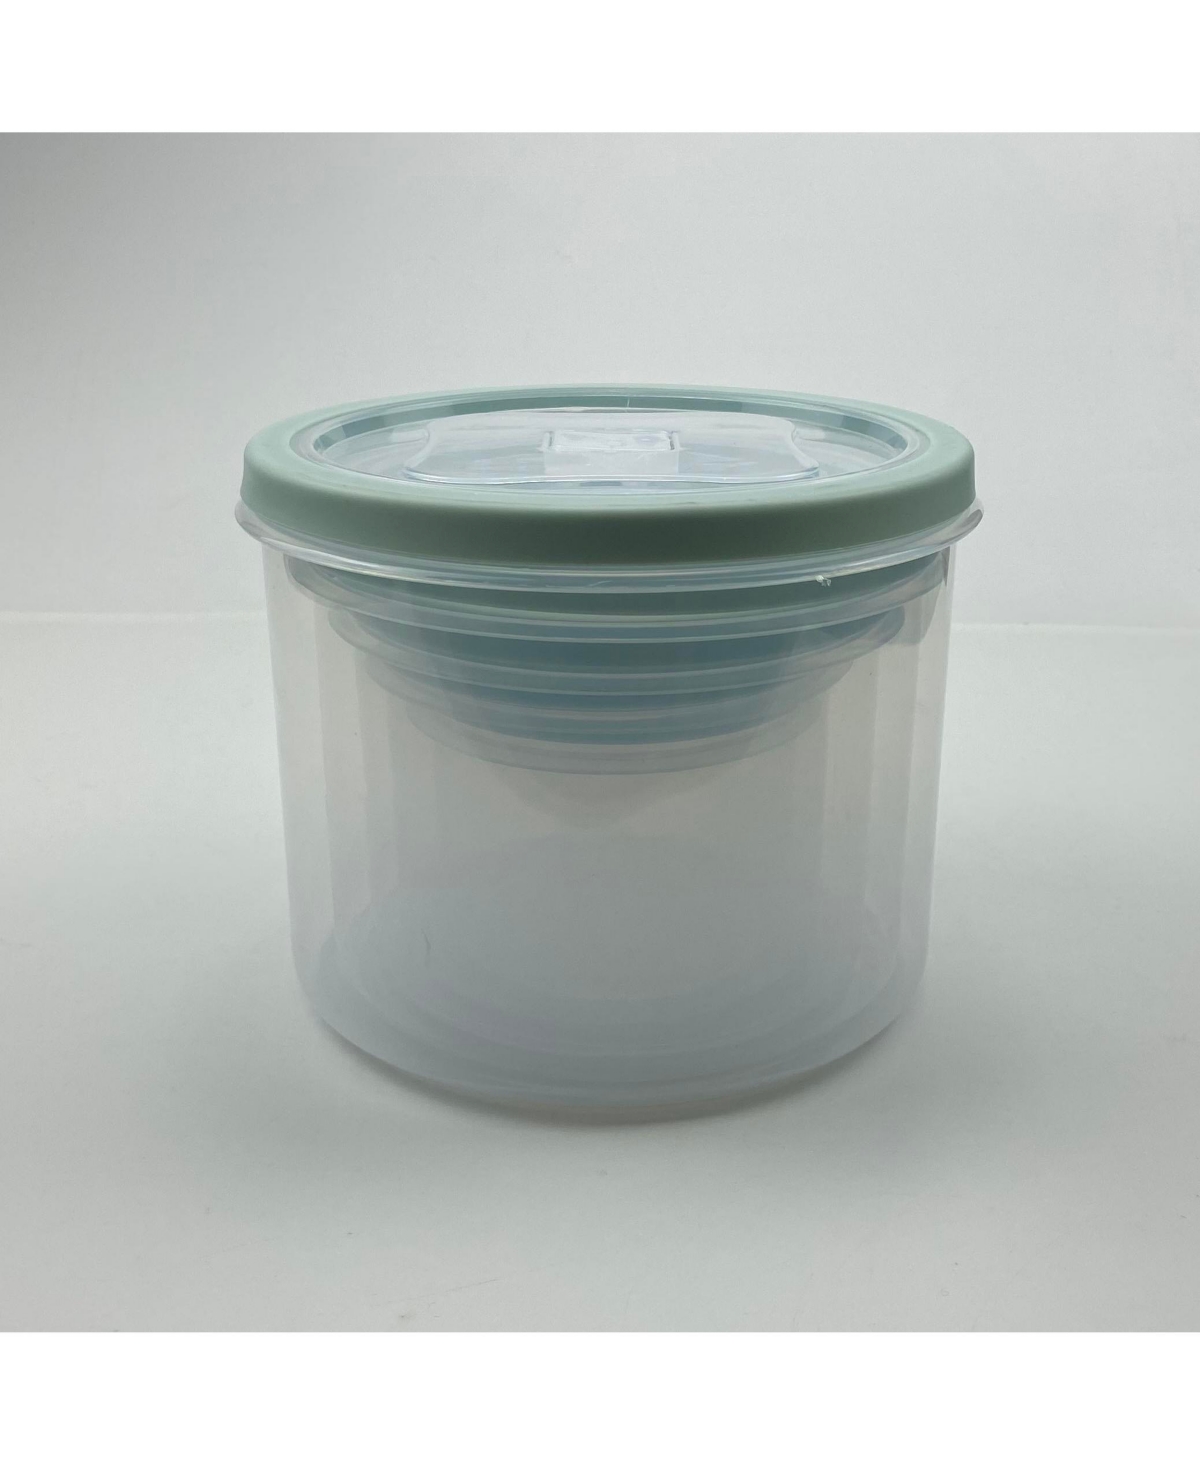 Art & Cook 10 Piece Round Plastic Food Storage Container With Vented Lid Set In Prestige